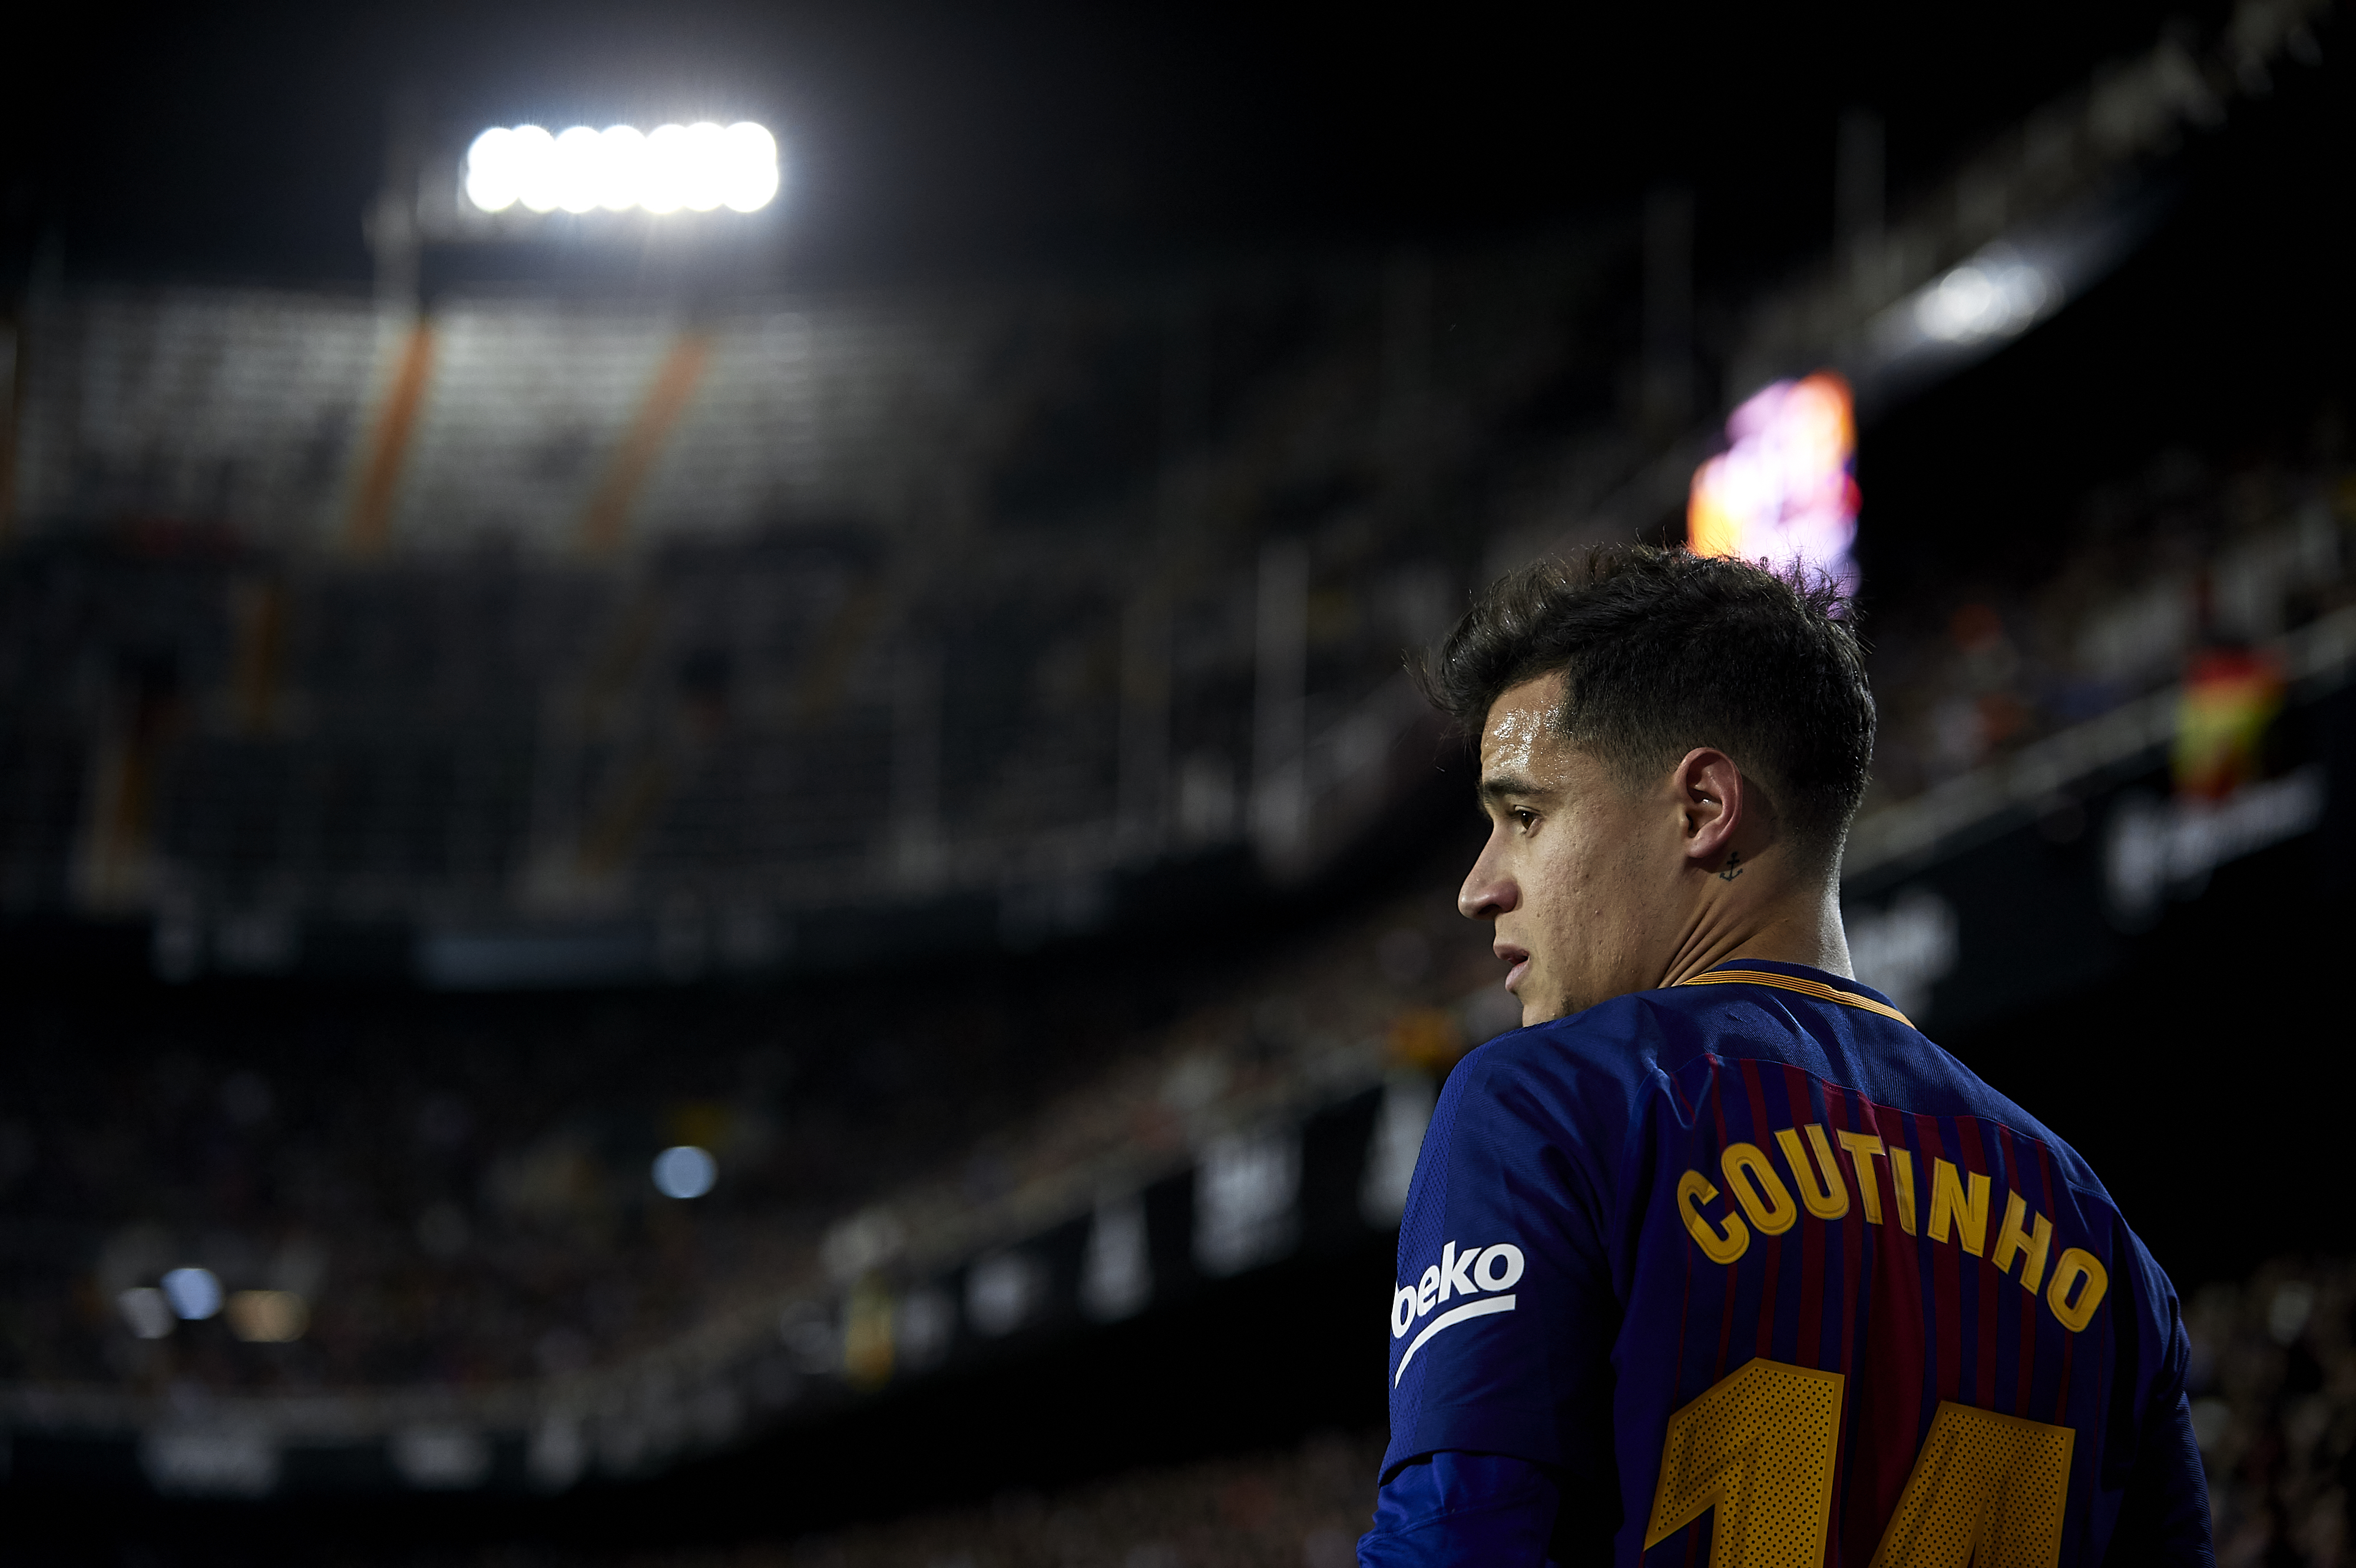 VALENCIA, SPAIN - FEBRUARY 08:  Philippe Coutinho of Barcelona looks on
during the Copa del Rey semi-final second leg match between Valencia and Barcelona on February 8, 2018 in Valencia, Spain.  (Photo by Manuel Queimadelos Alonso/Getty Images)